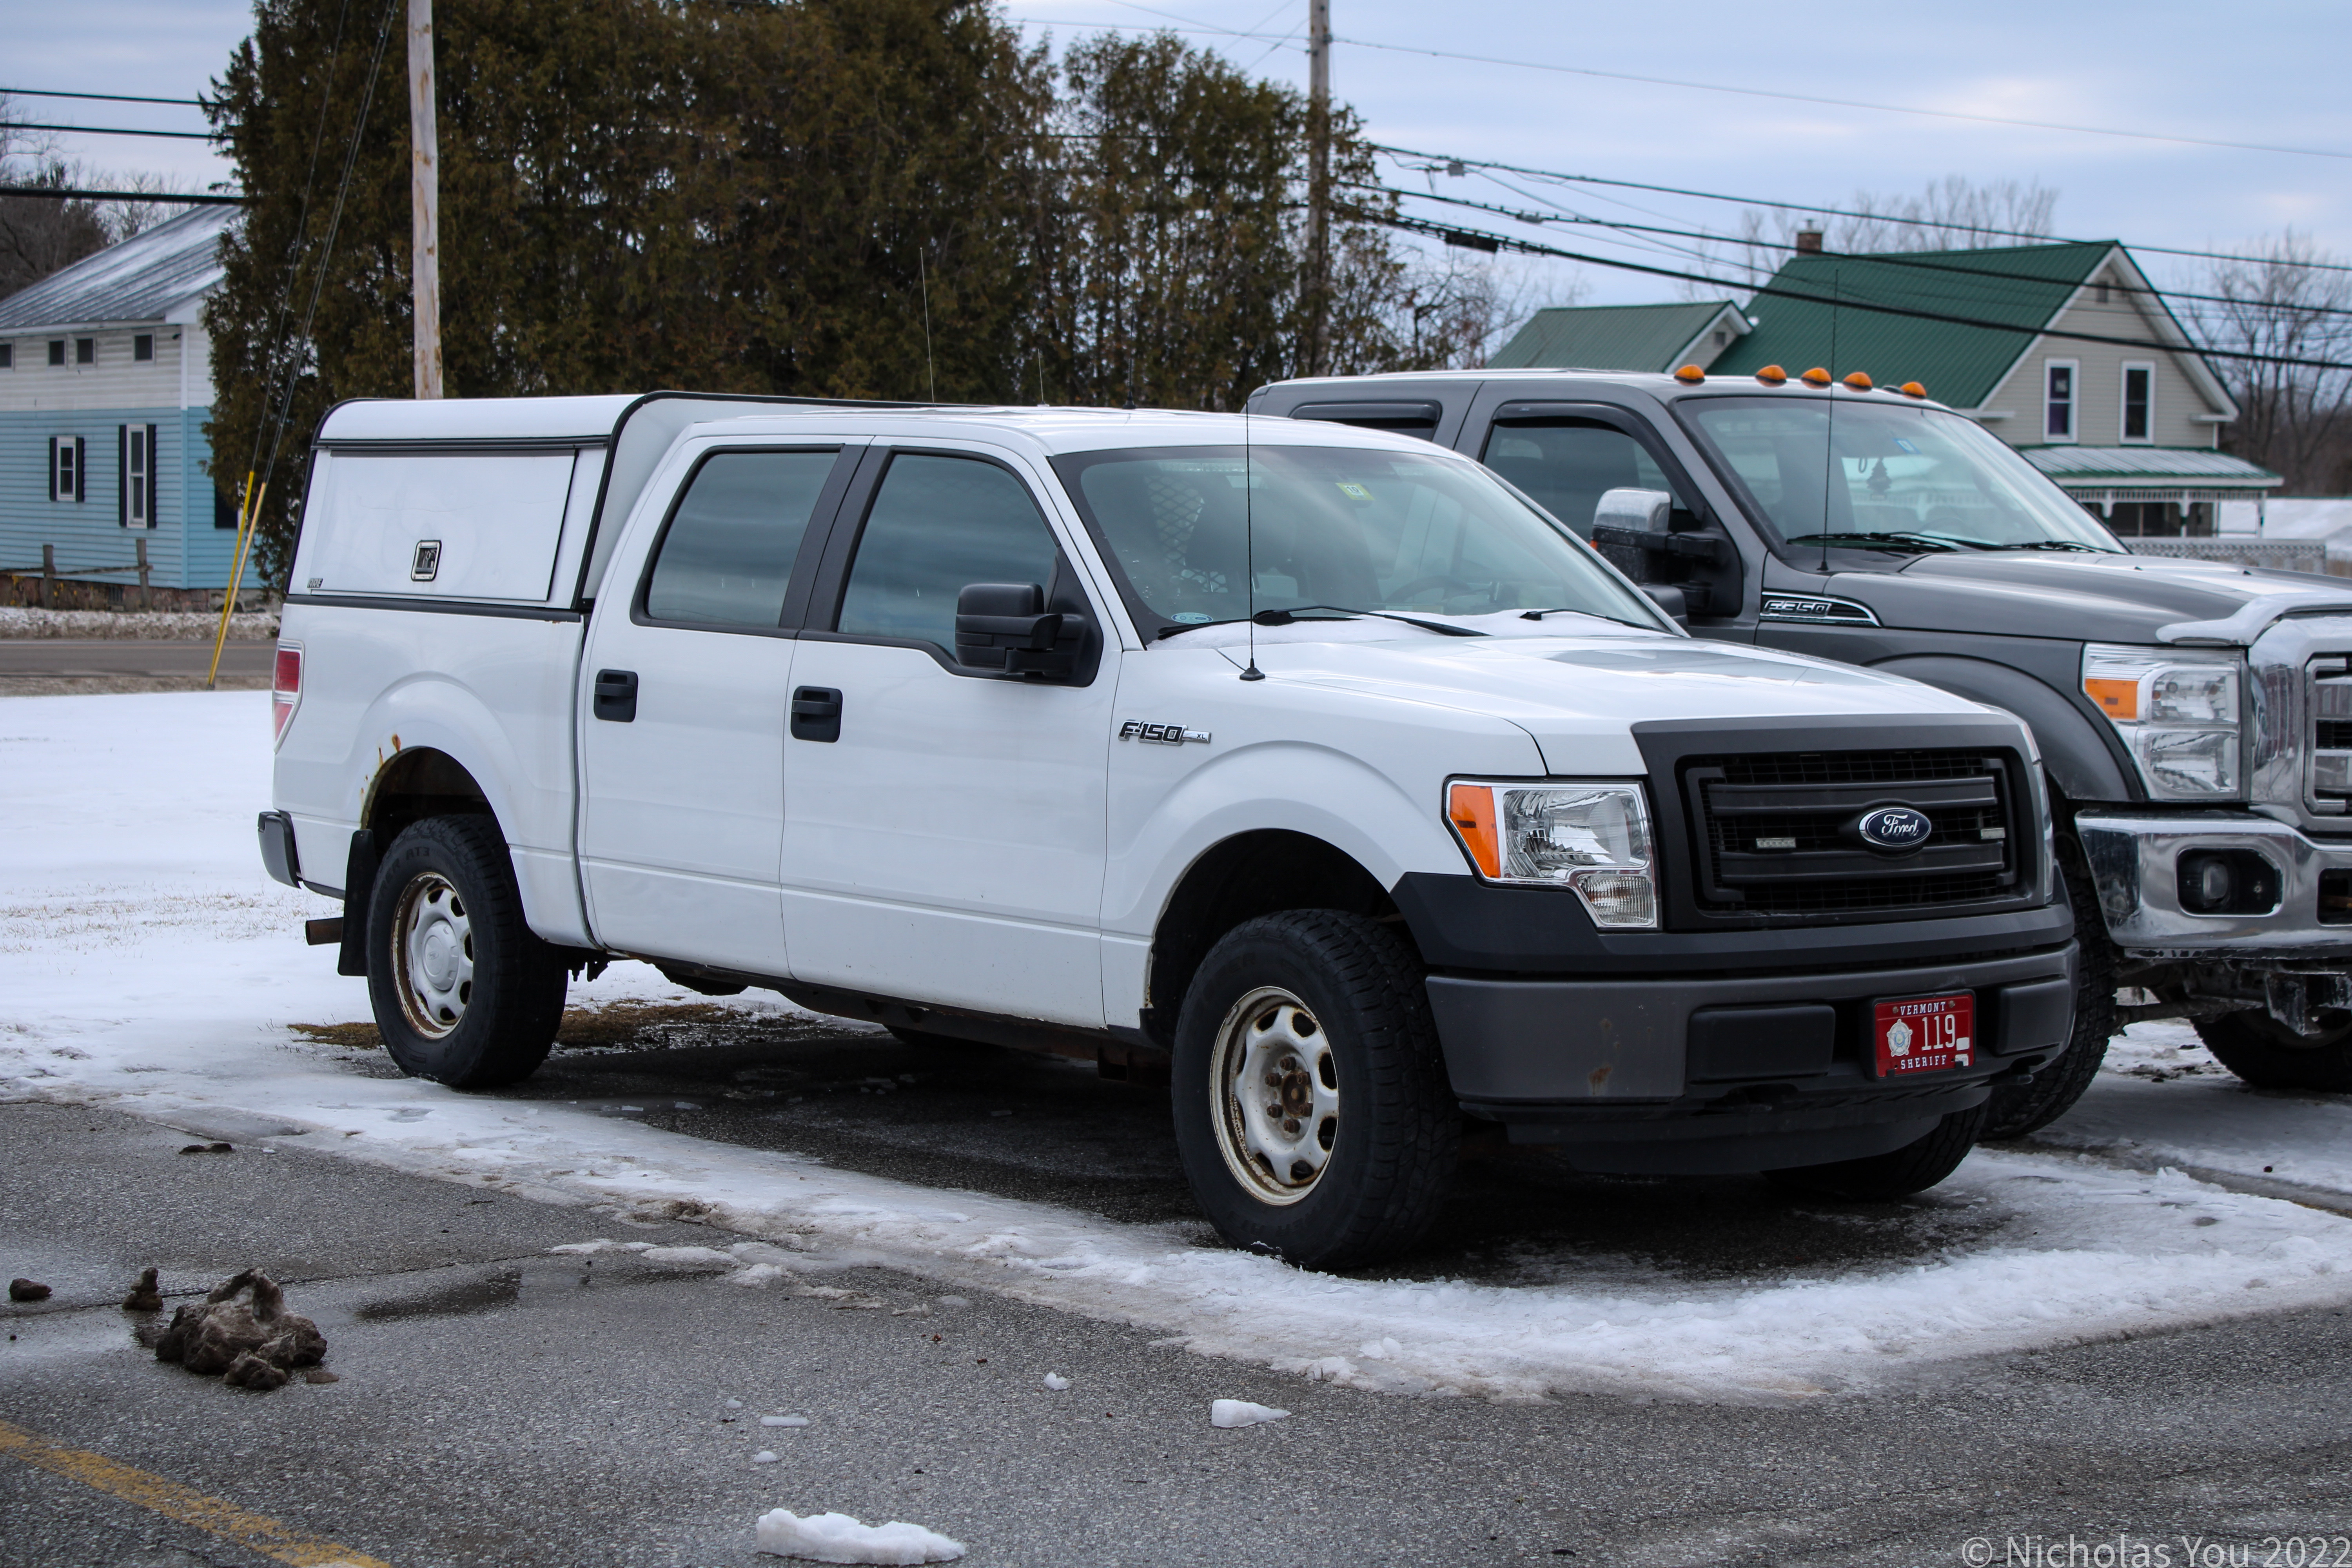 A photo  of Franklin County Sheriff
            Cruiser 119, a 2009-2014 Ford F-150 Crew Cab             taken by Nicholas You